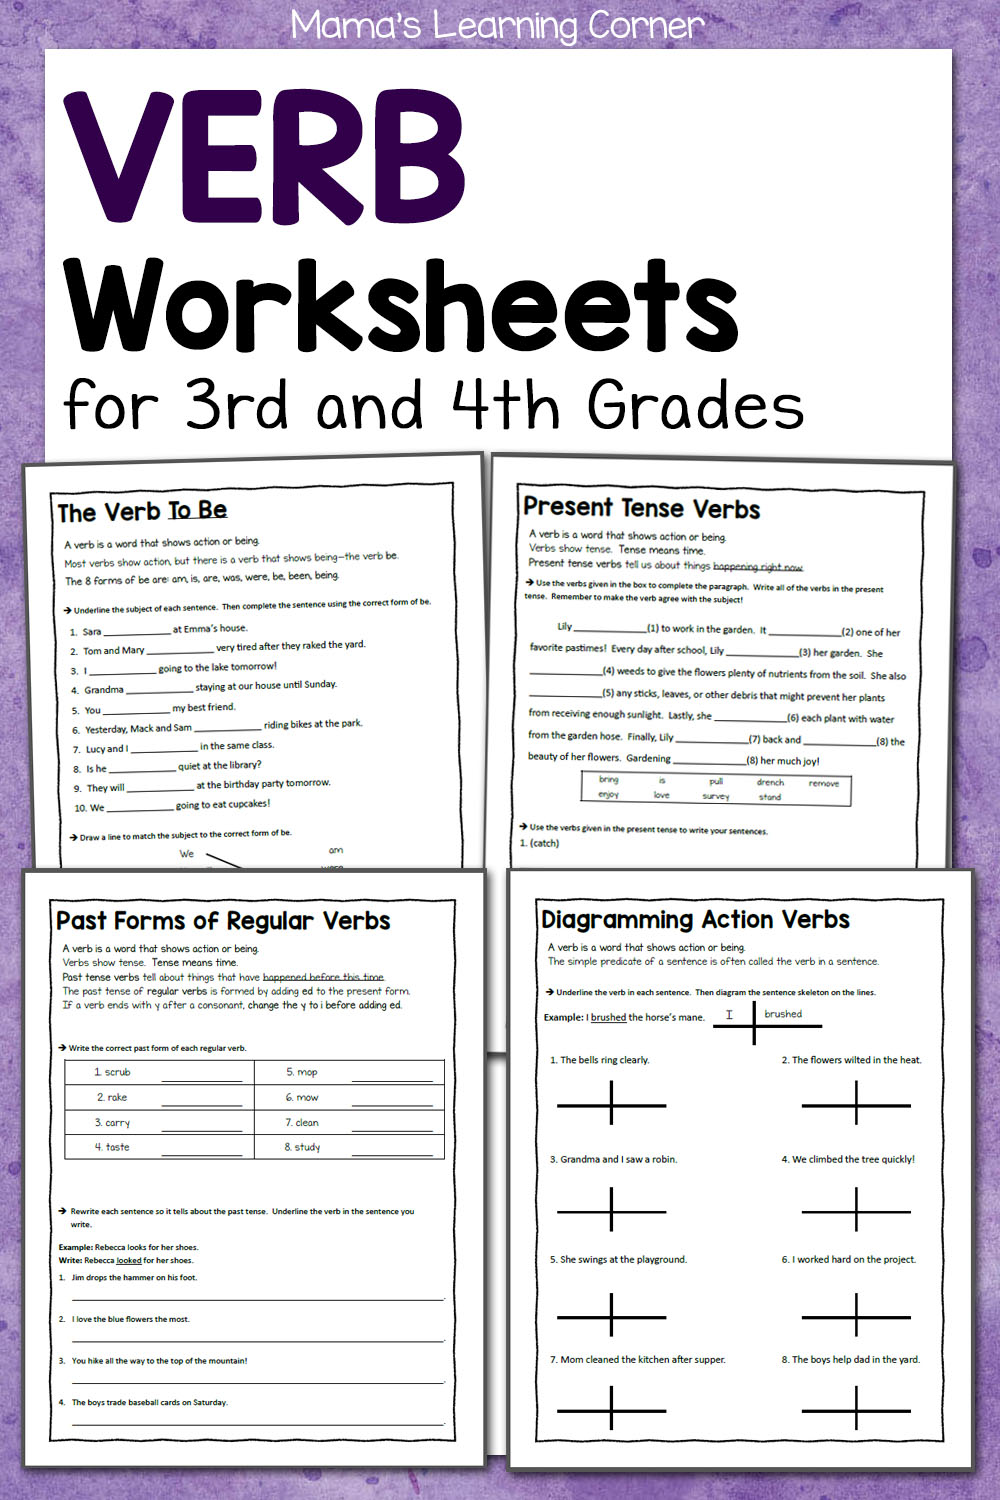 Verb Worksheets For 3rd And 4th Grades Mamas Learning Corner